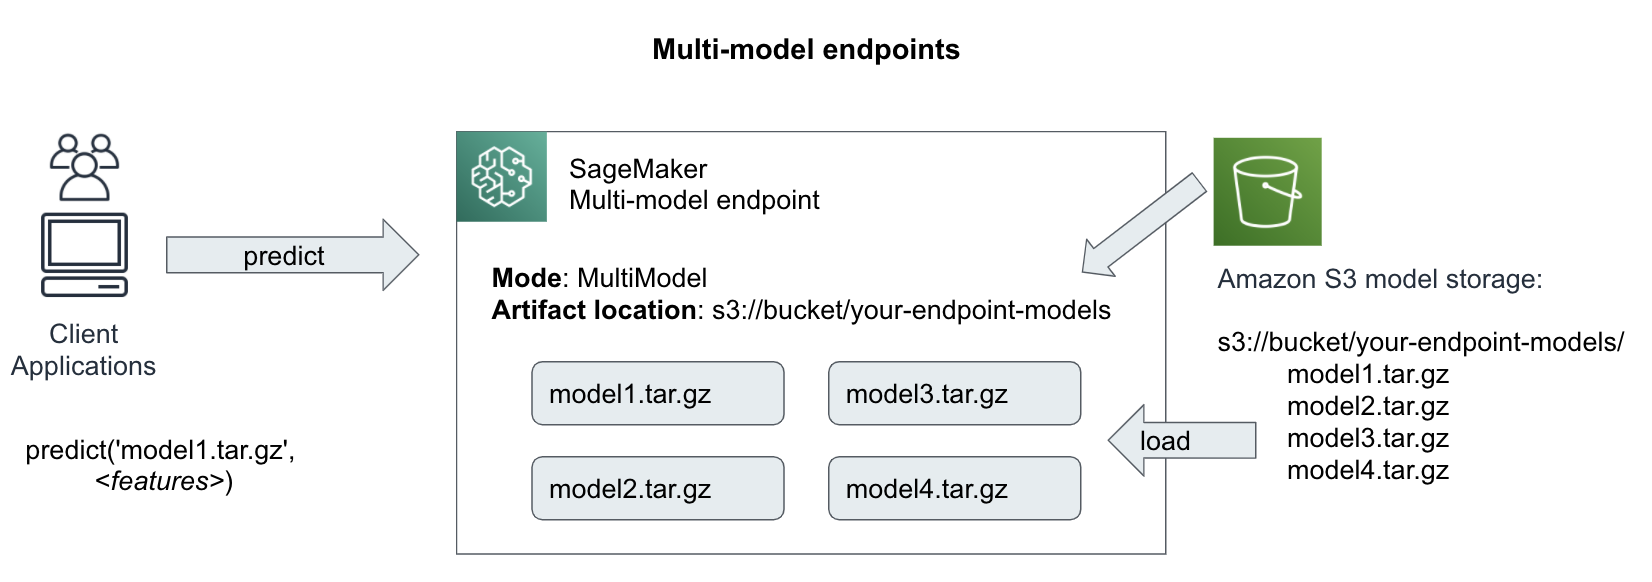 Invoke a specific model with multi model endpoints